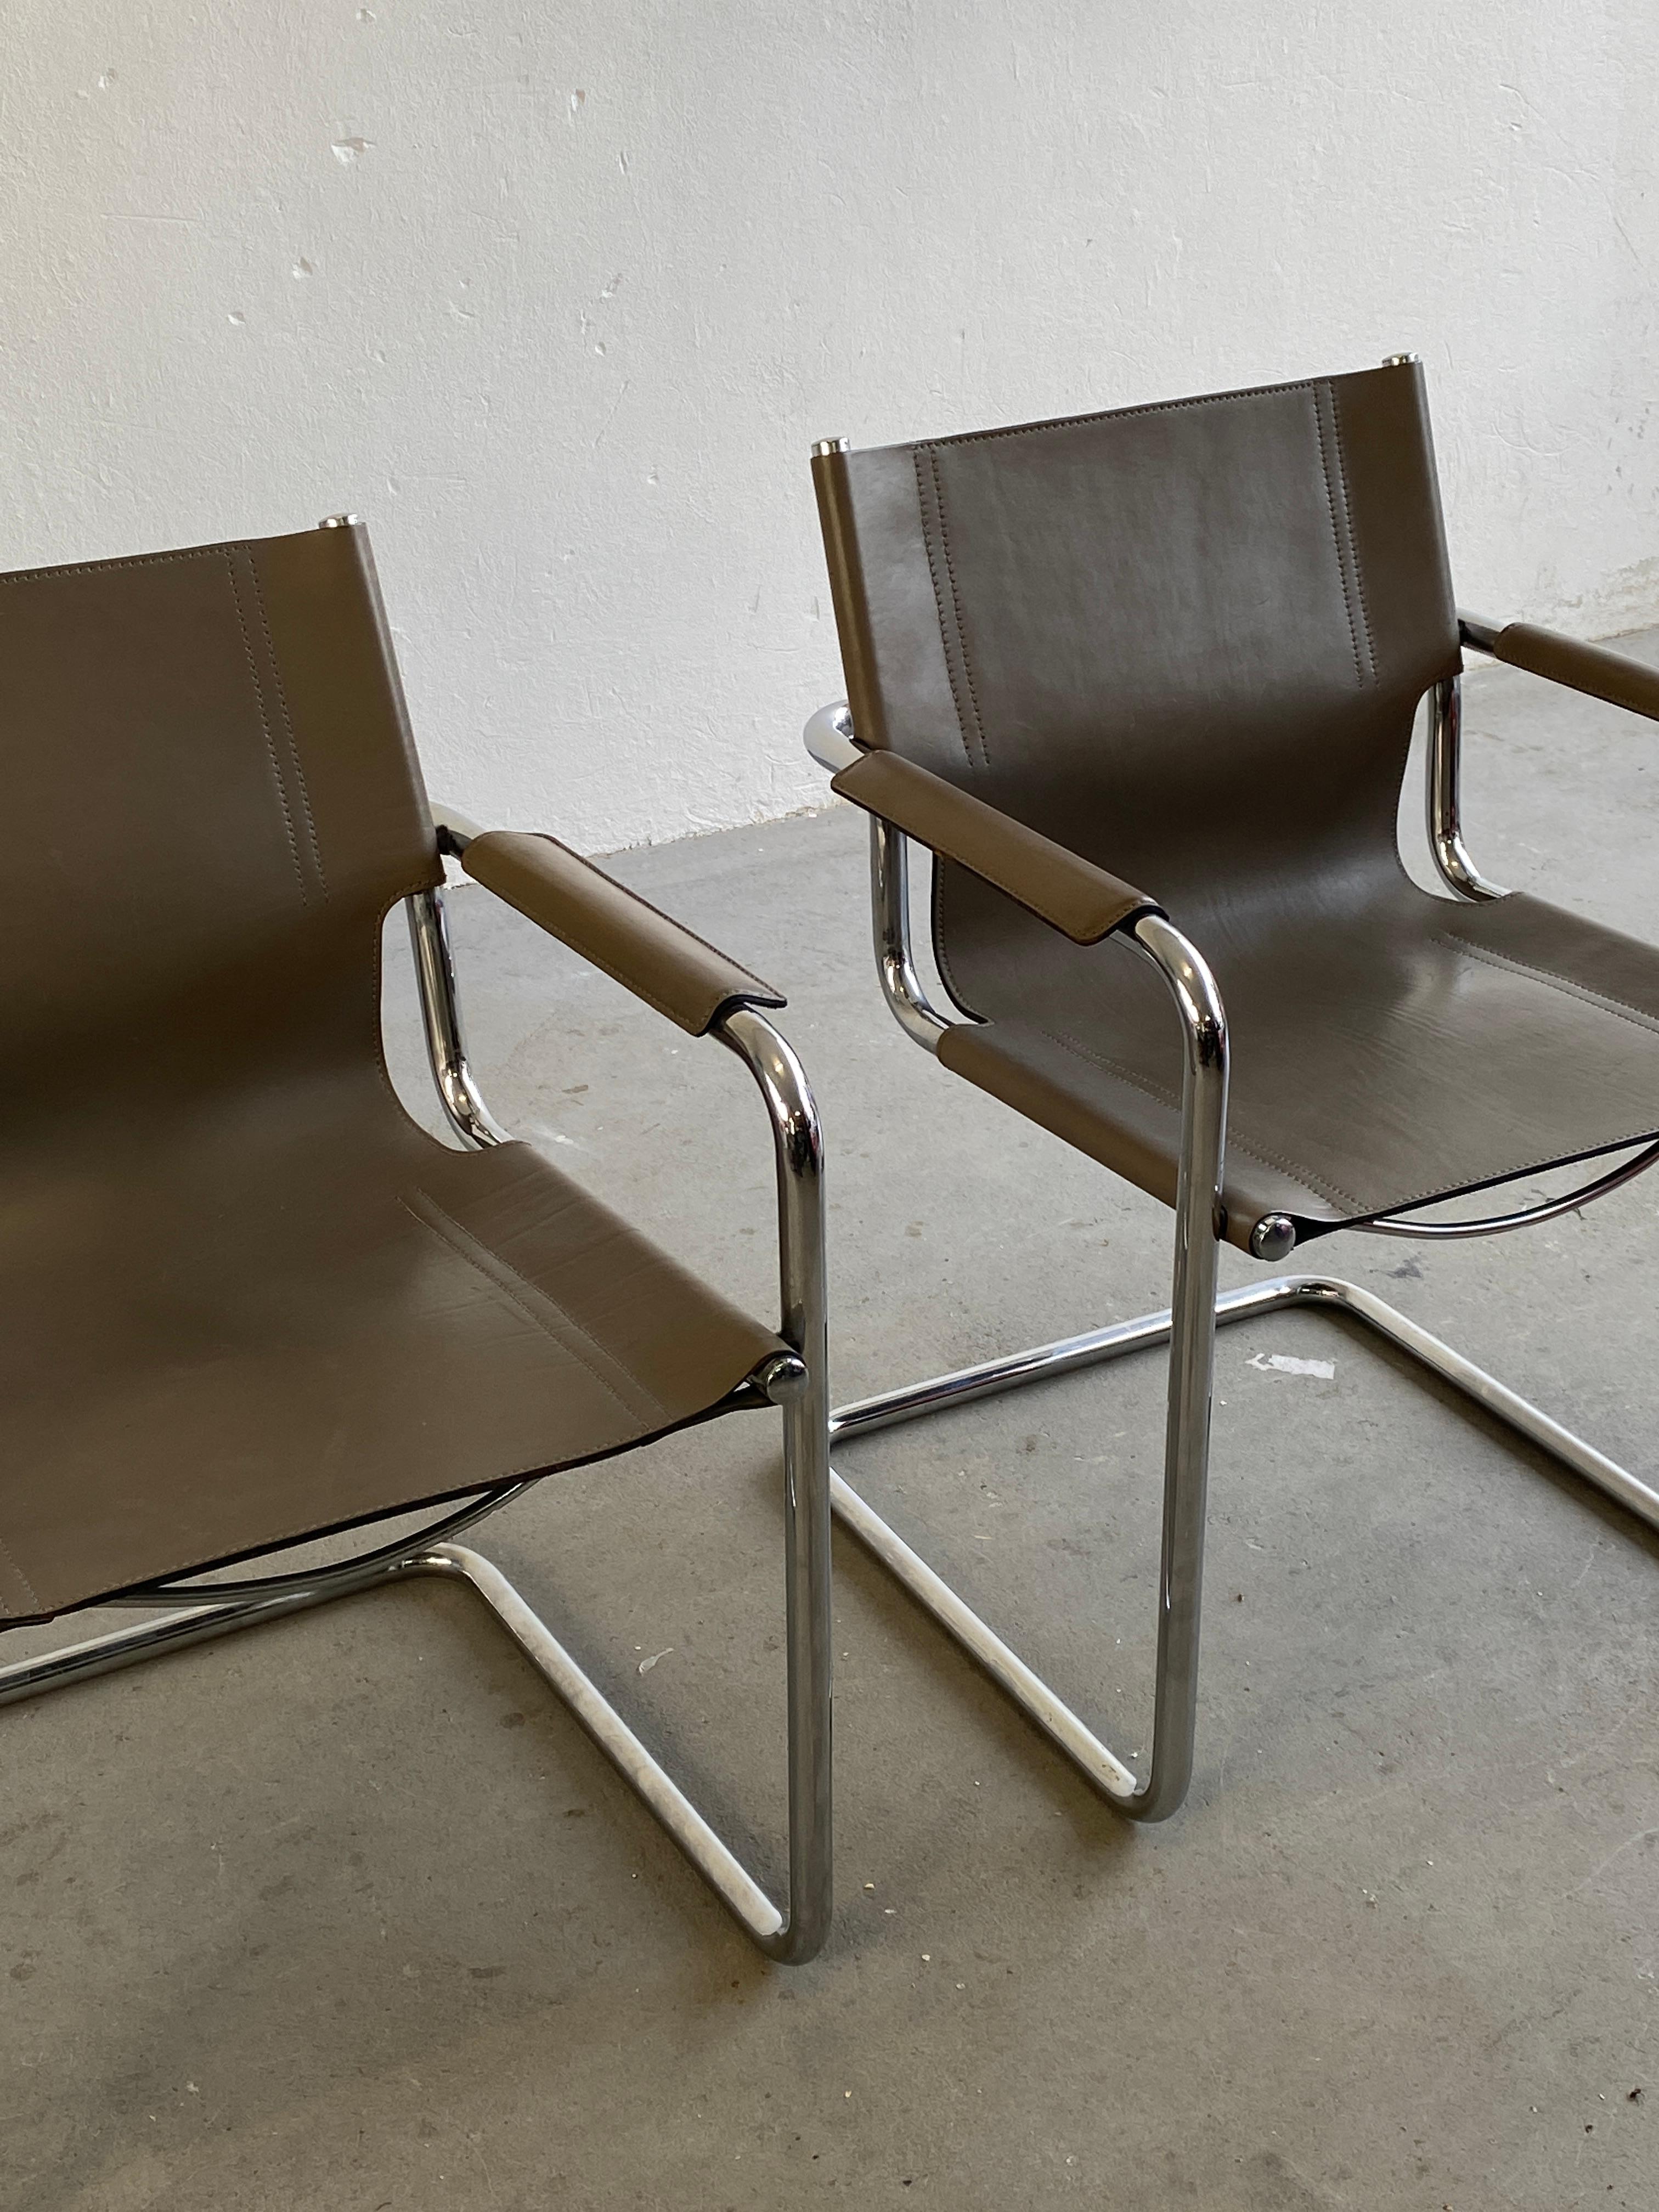 Vintage Leather Cantilever Chairs, Centro Studi for Matteo Grassi, 1980s Italy 4